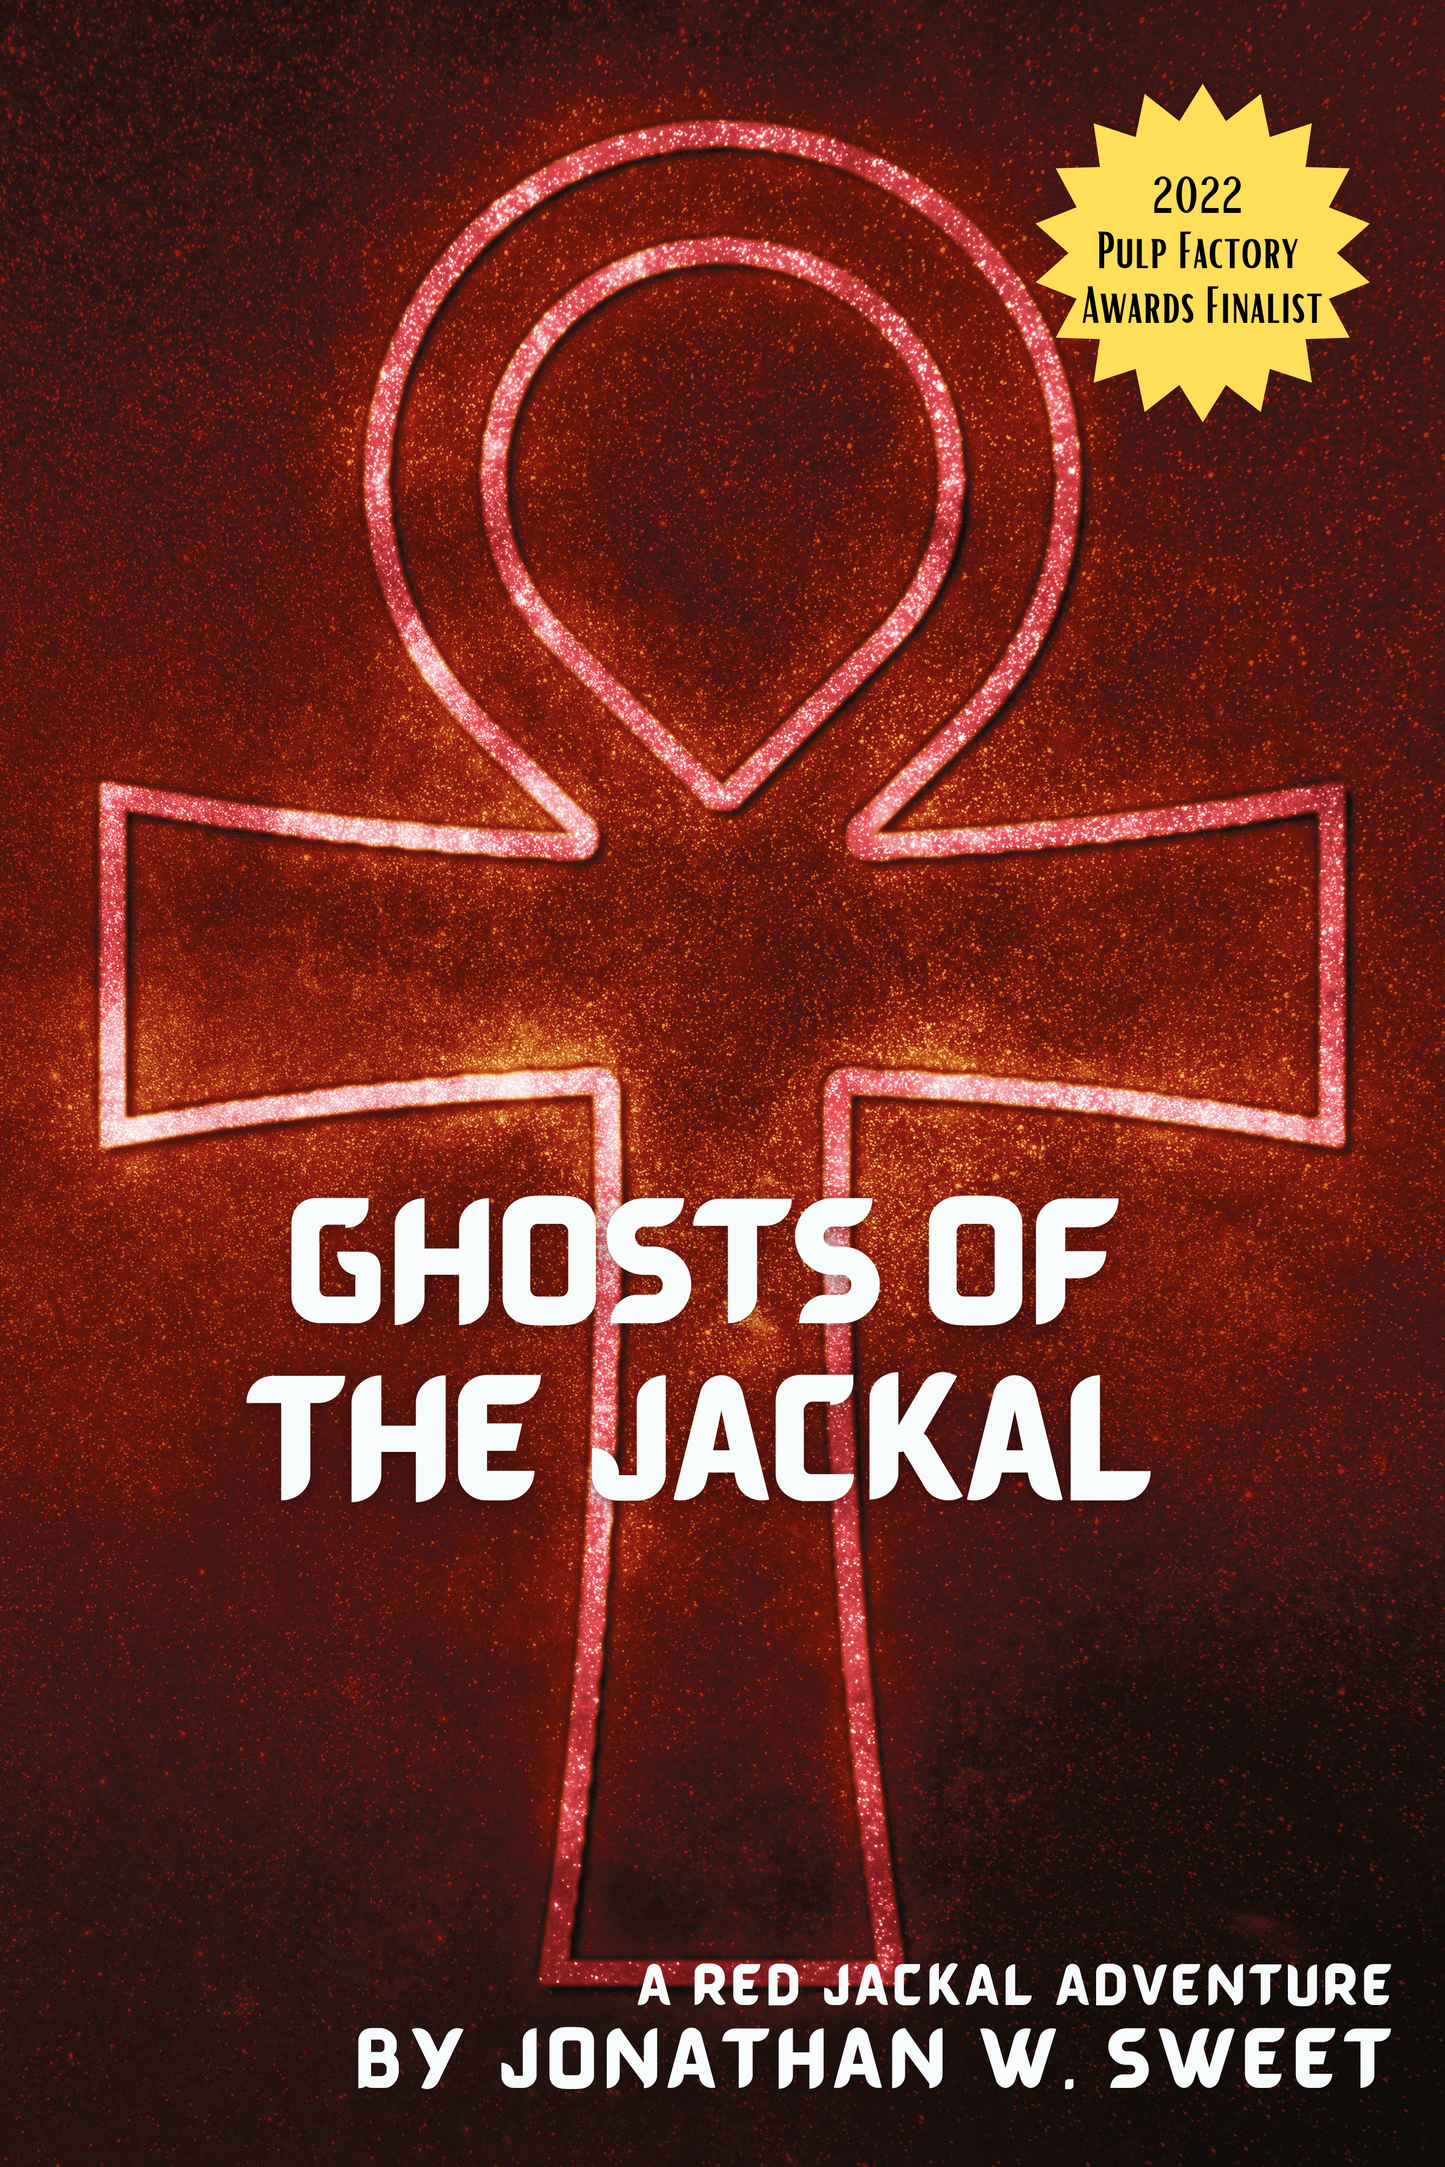 Ghosts of the Jackal by Jonathan W. Sweet (signed)